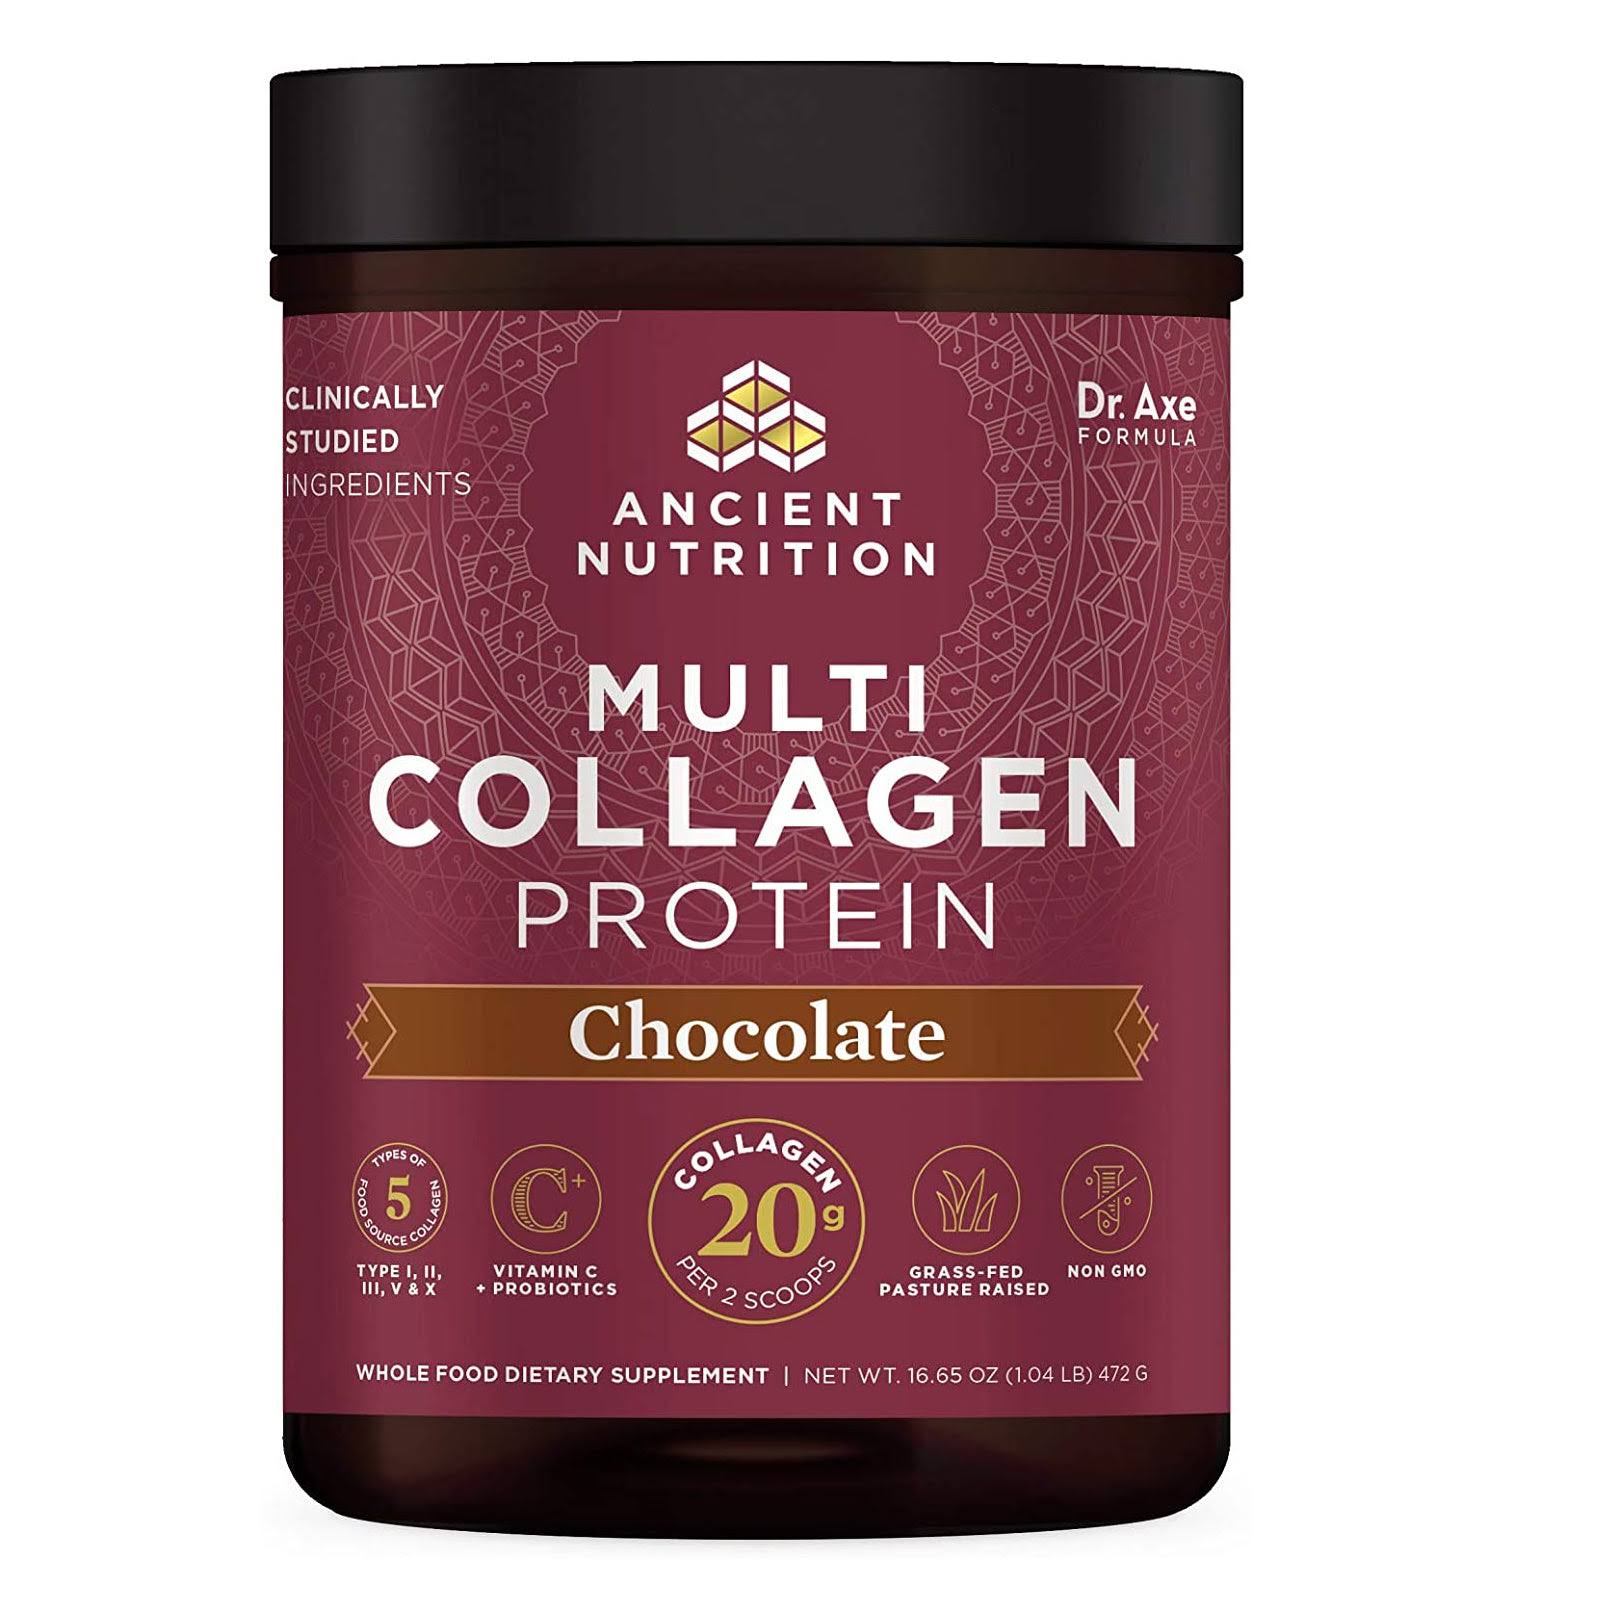 Ancient Nutrition Dr. Axe Multi Collagen Protein Chocolate 525g Powder